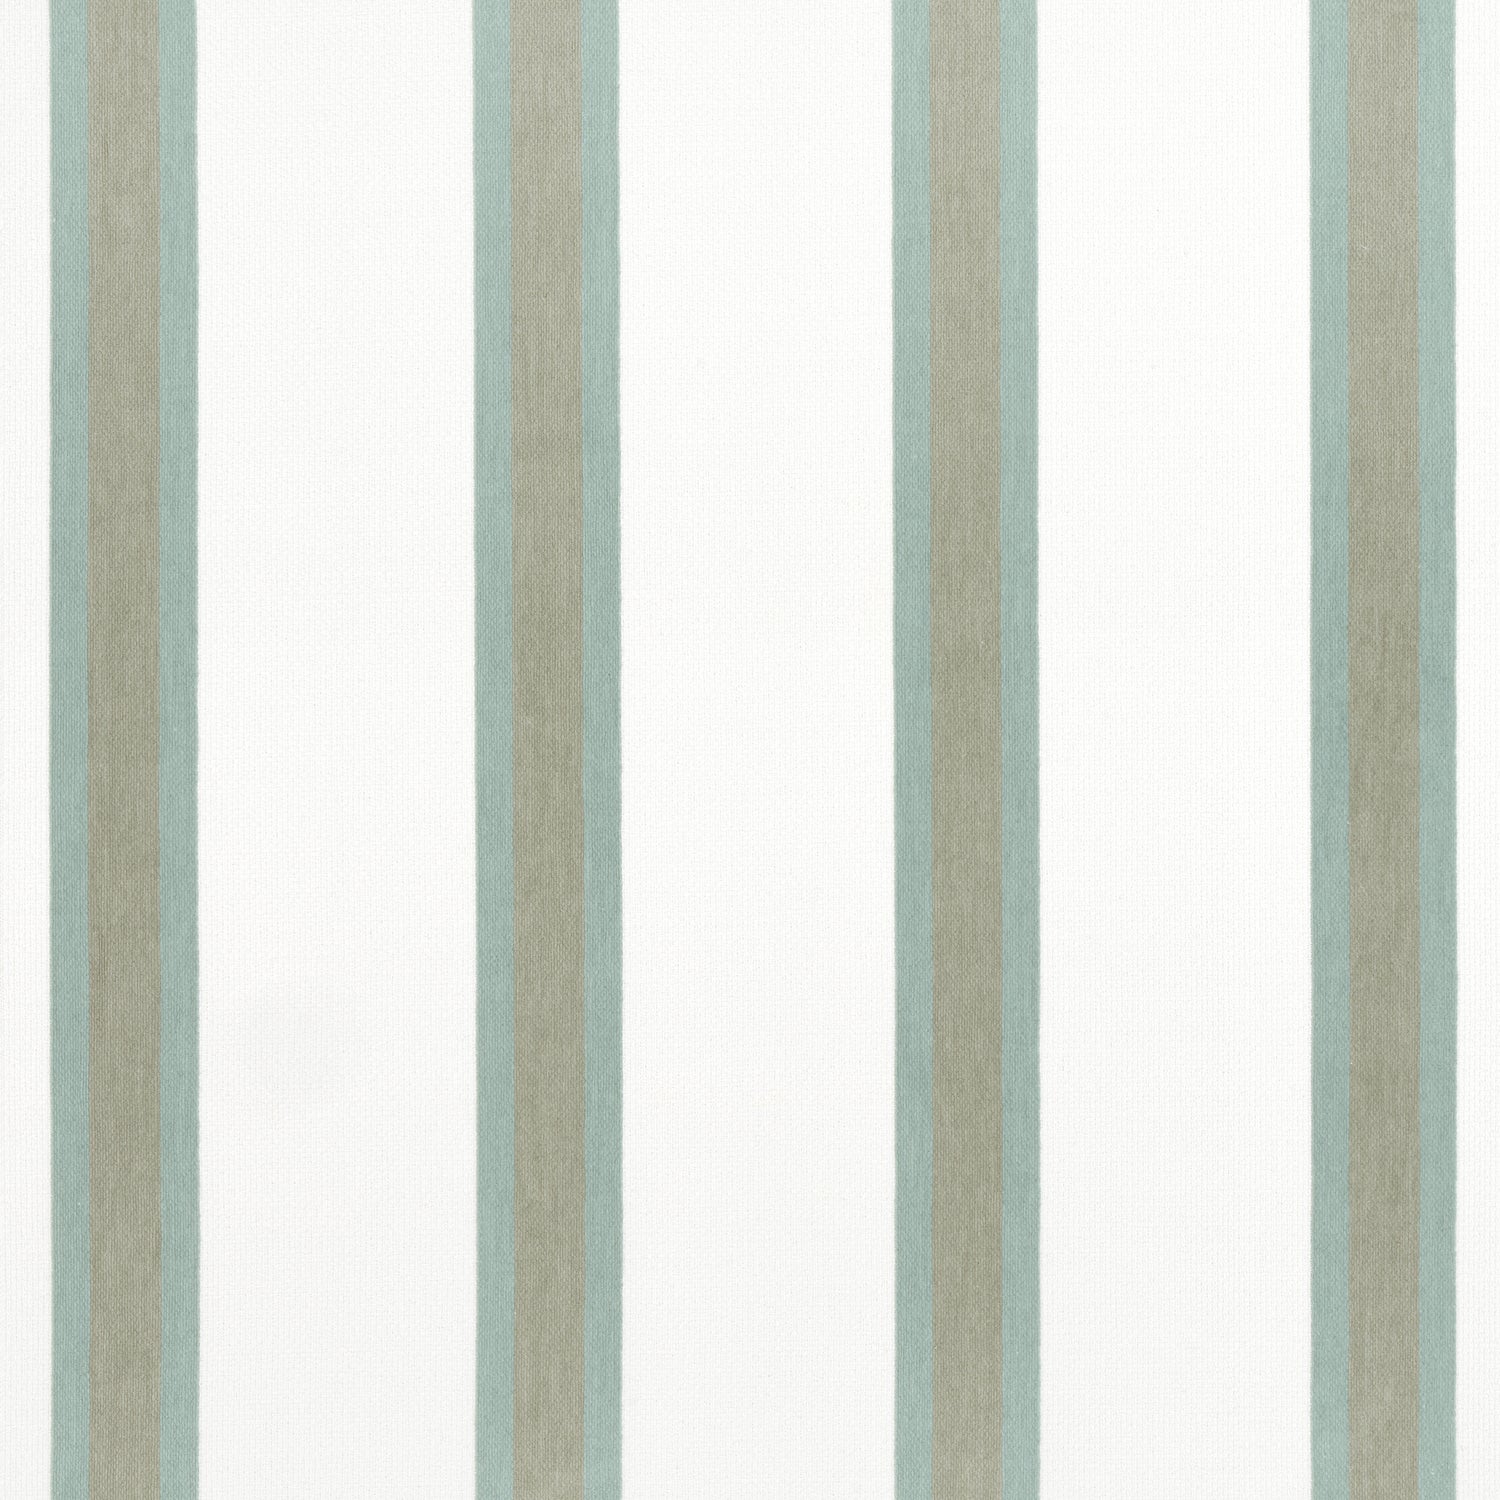 Abito Stripe fabric in seafoam color - pattern number W77144 - by Thibaut in the Veneto collection